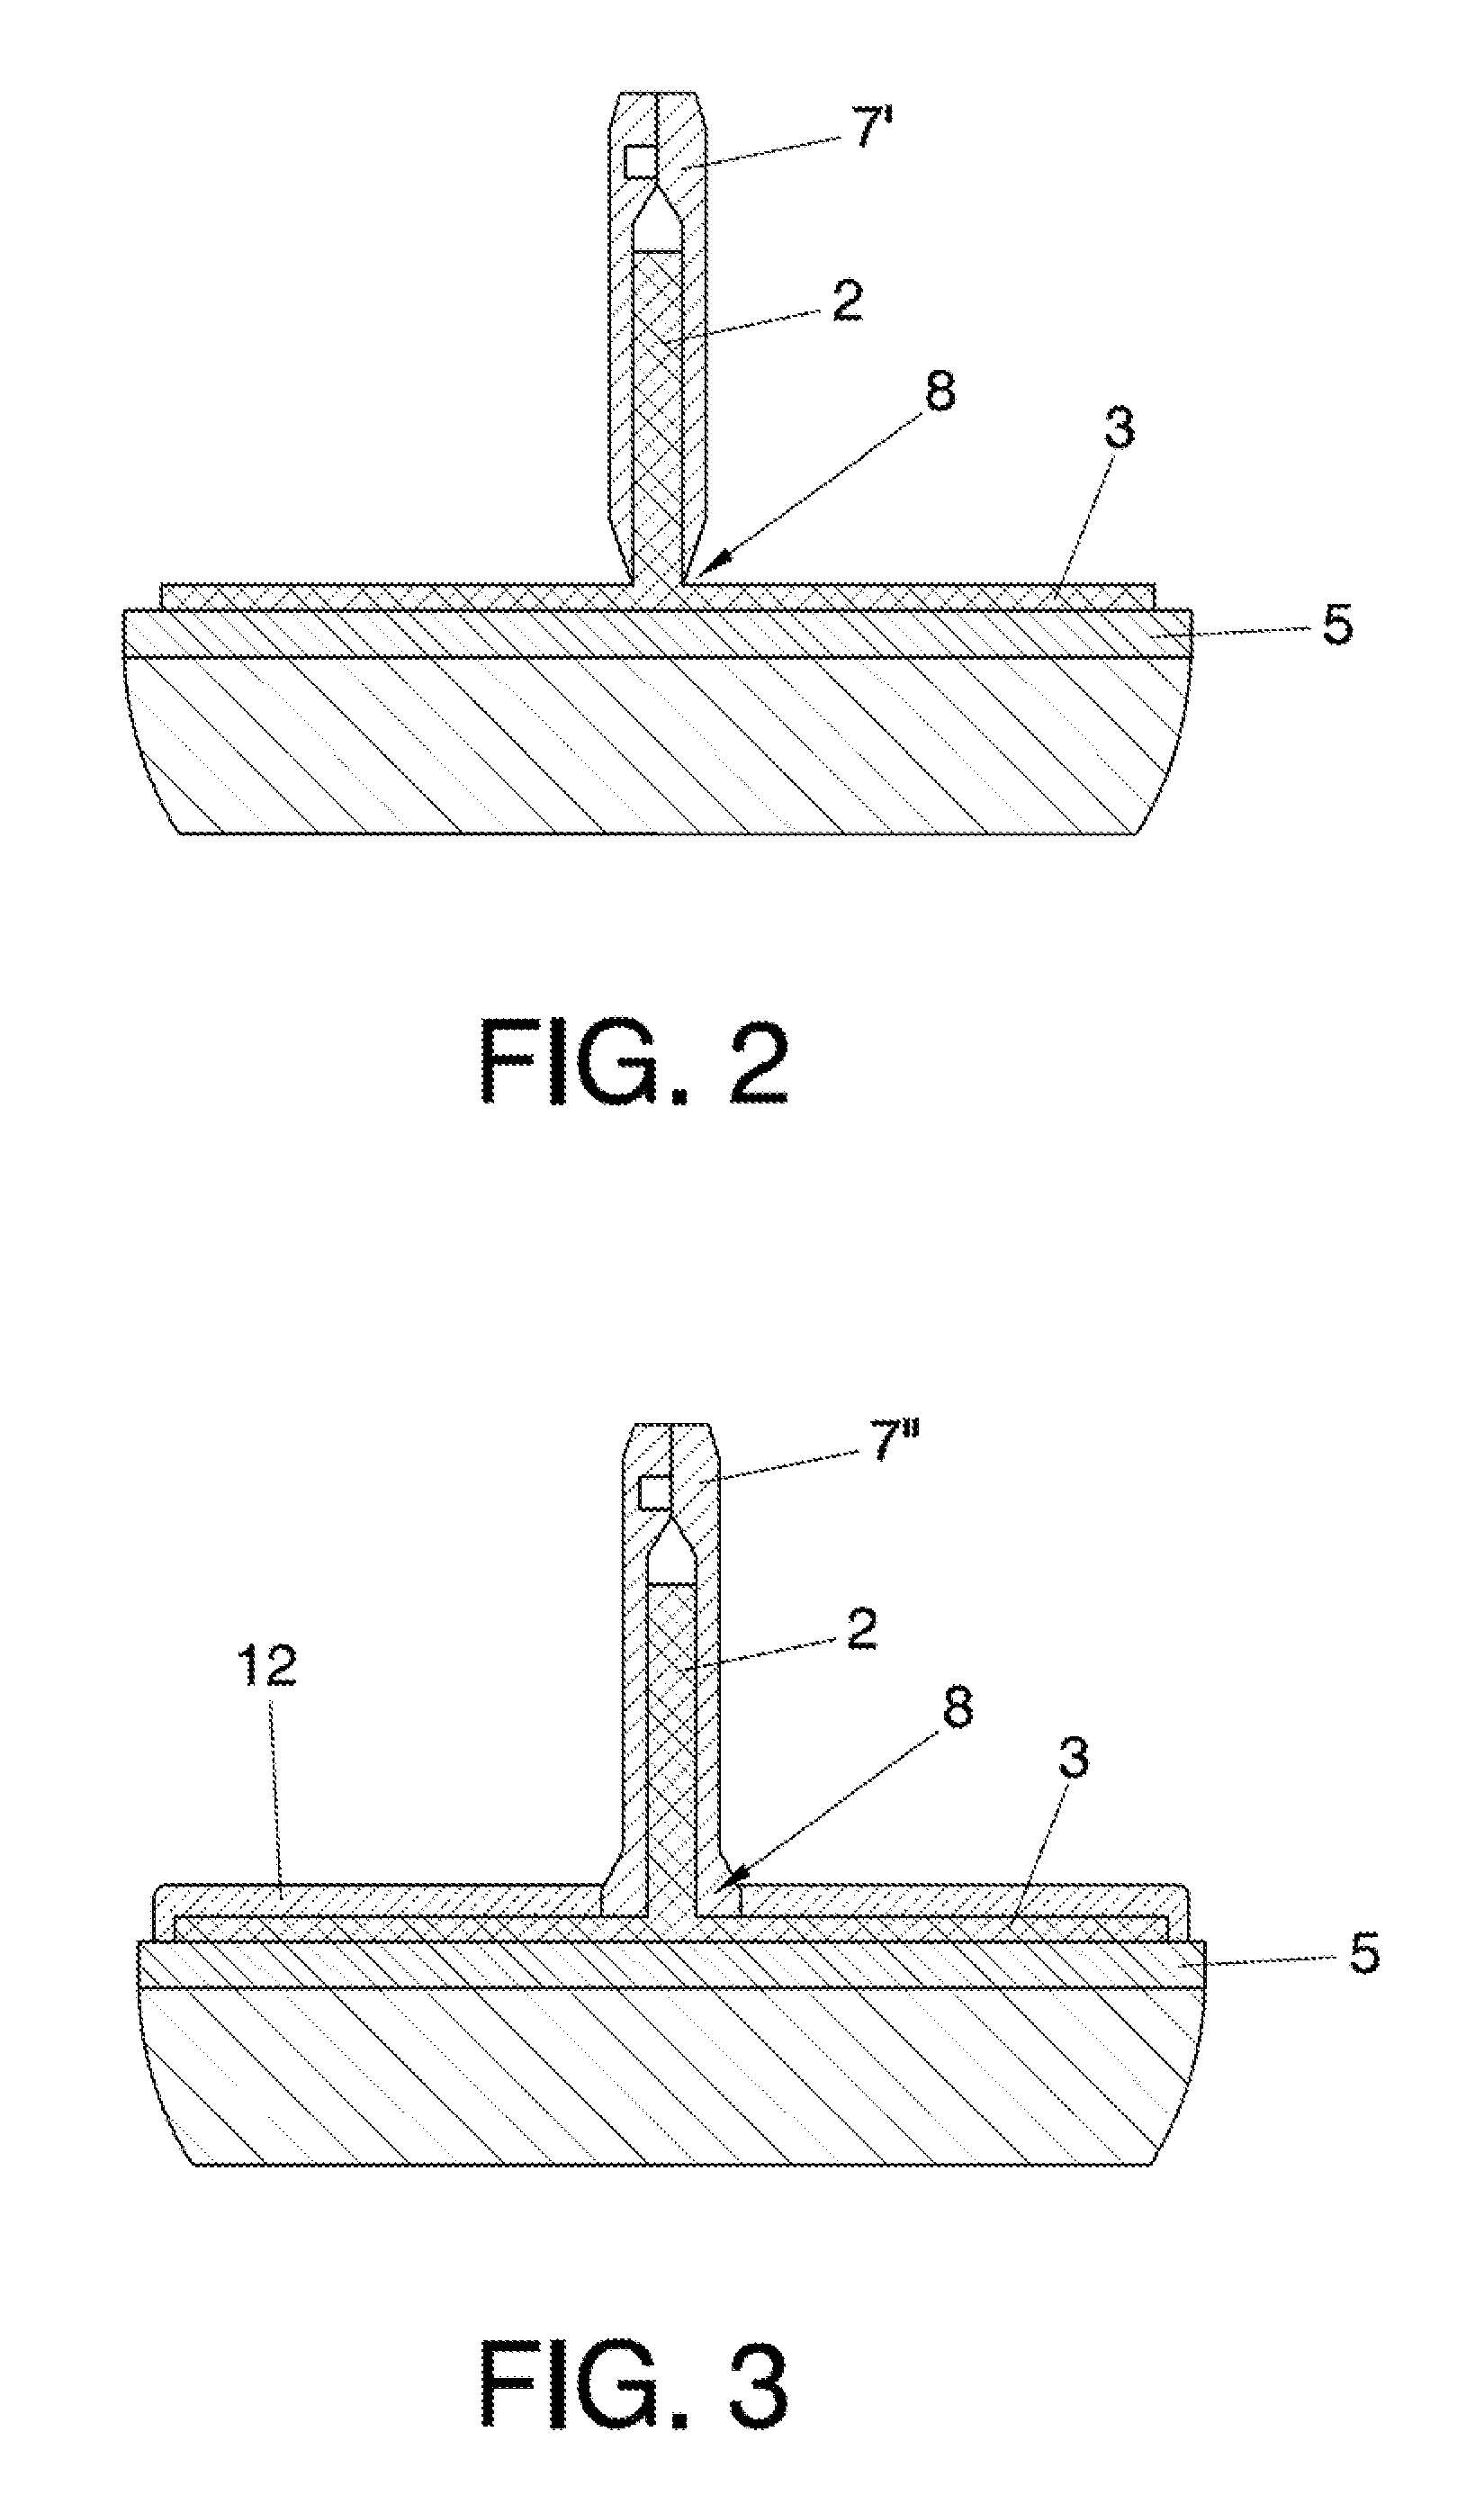 Method of manufacturing "t" shaped stringers for an aircraft and curing tool used thereof